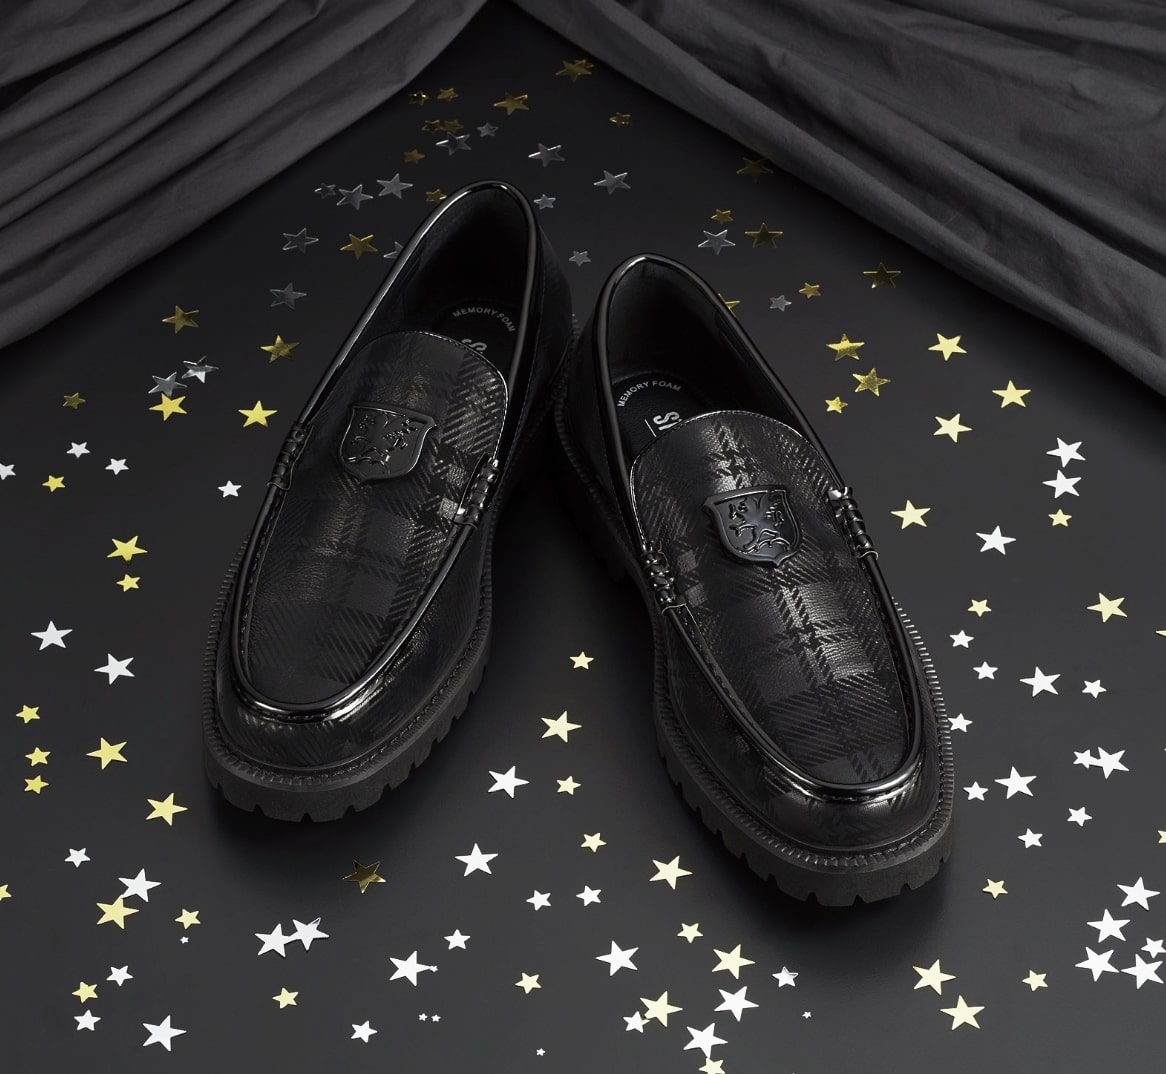 Stacy Adams Prom Picks featuring the Vonn loafer on a black background with confetti stars.